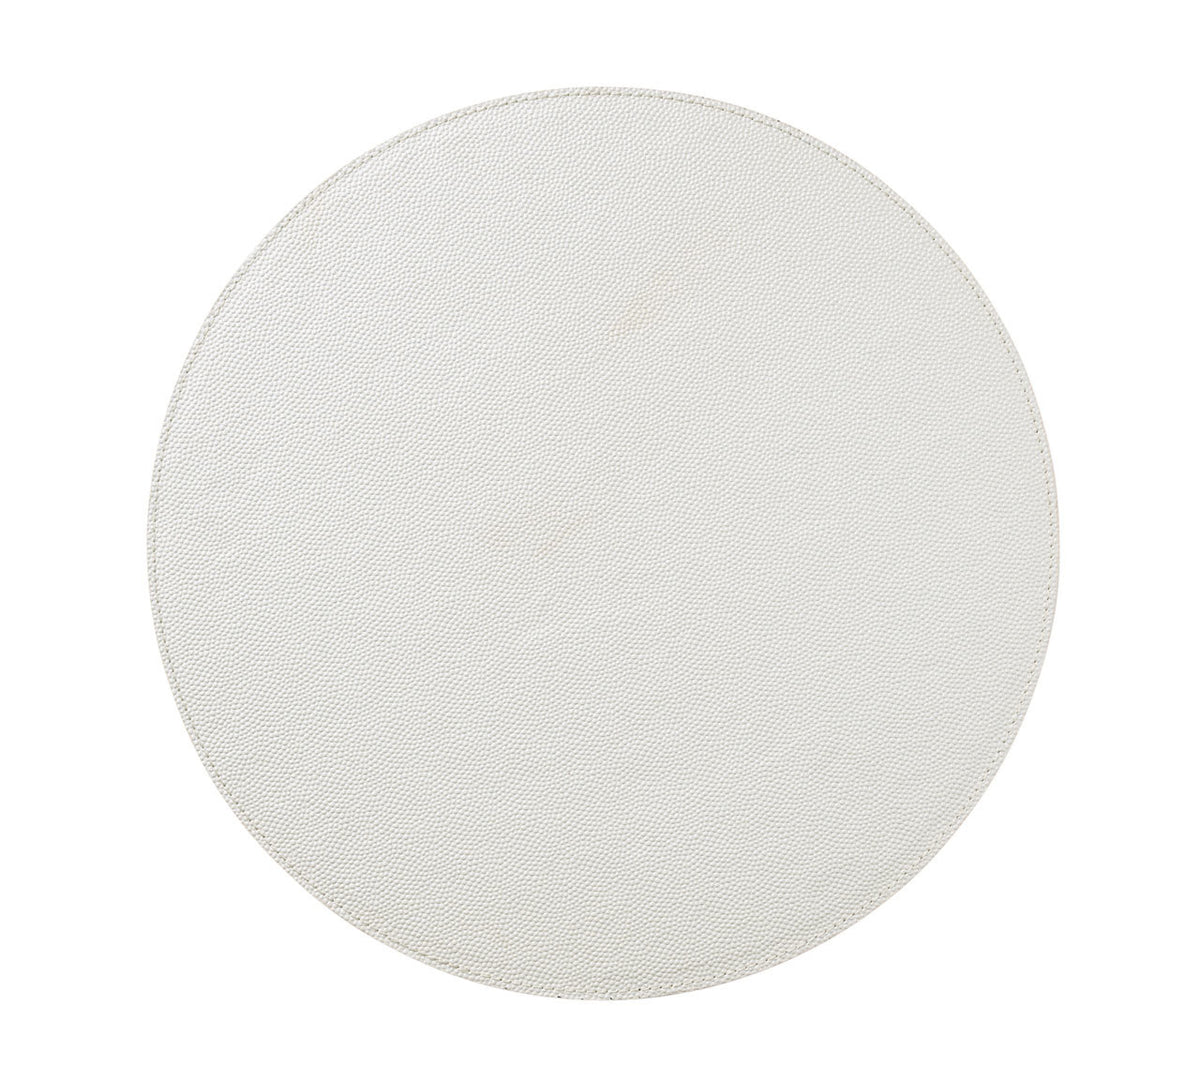 Shagreen Placemat In Pearl, Set of 4